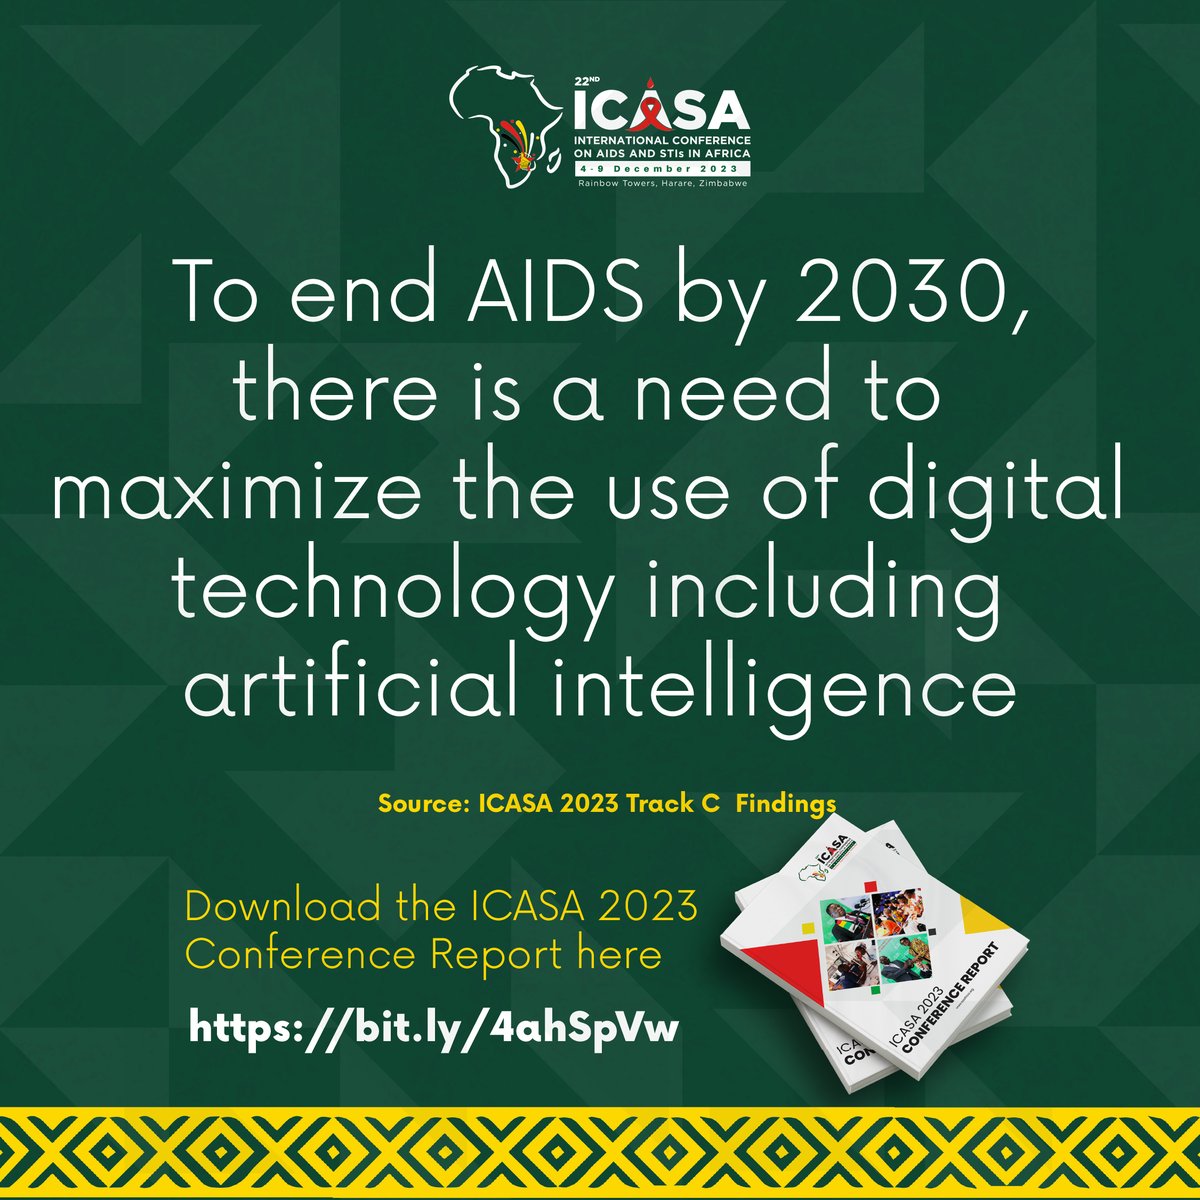 Using digital tools, such as AI, supports #HIV prevention, treatment, and care by analyzing data to develop more effective strategies. This leads to enhanced access to healthcare services, enables remote patient monitoring, and improves the efficiency of data management systems.